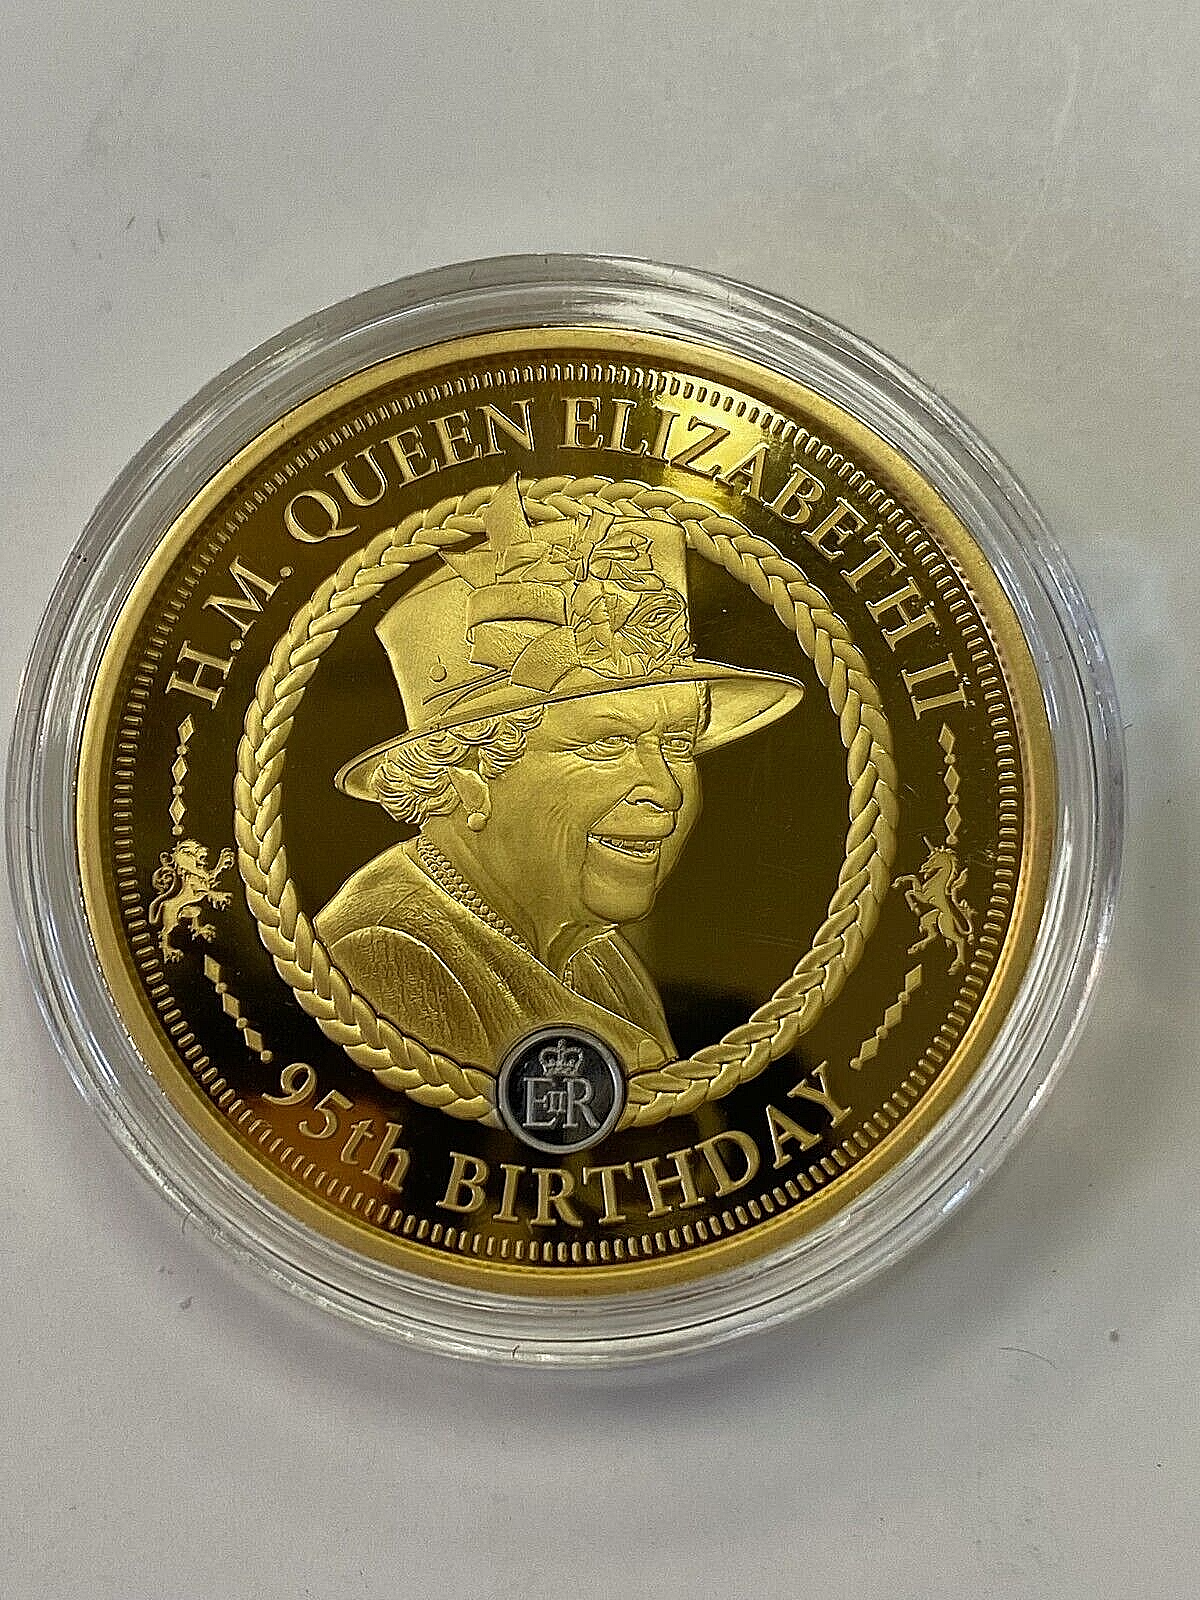 QUEEN ELIZABETH II PROOF COIN COLLECTION  24K GOLD PLATED HER MAJESTY 95th B-DAY Без бренда